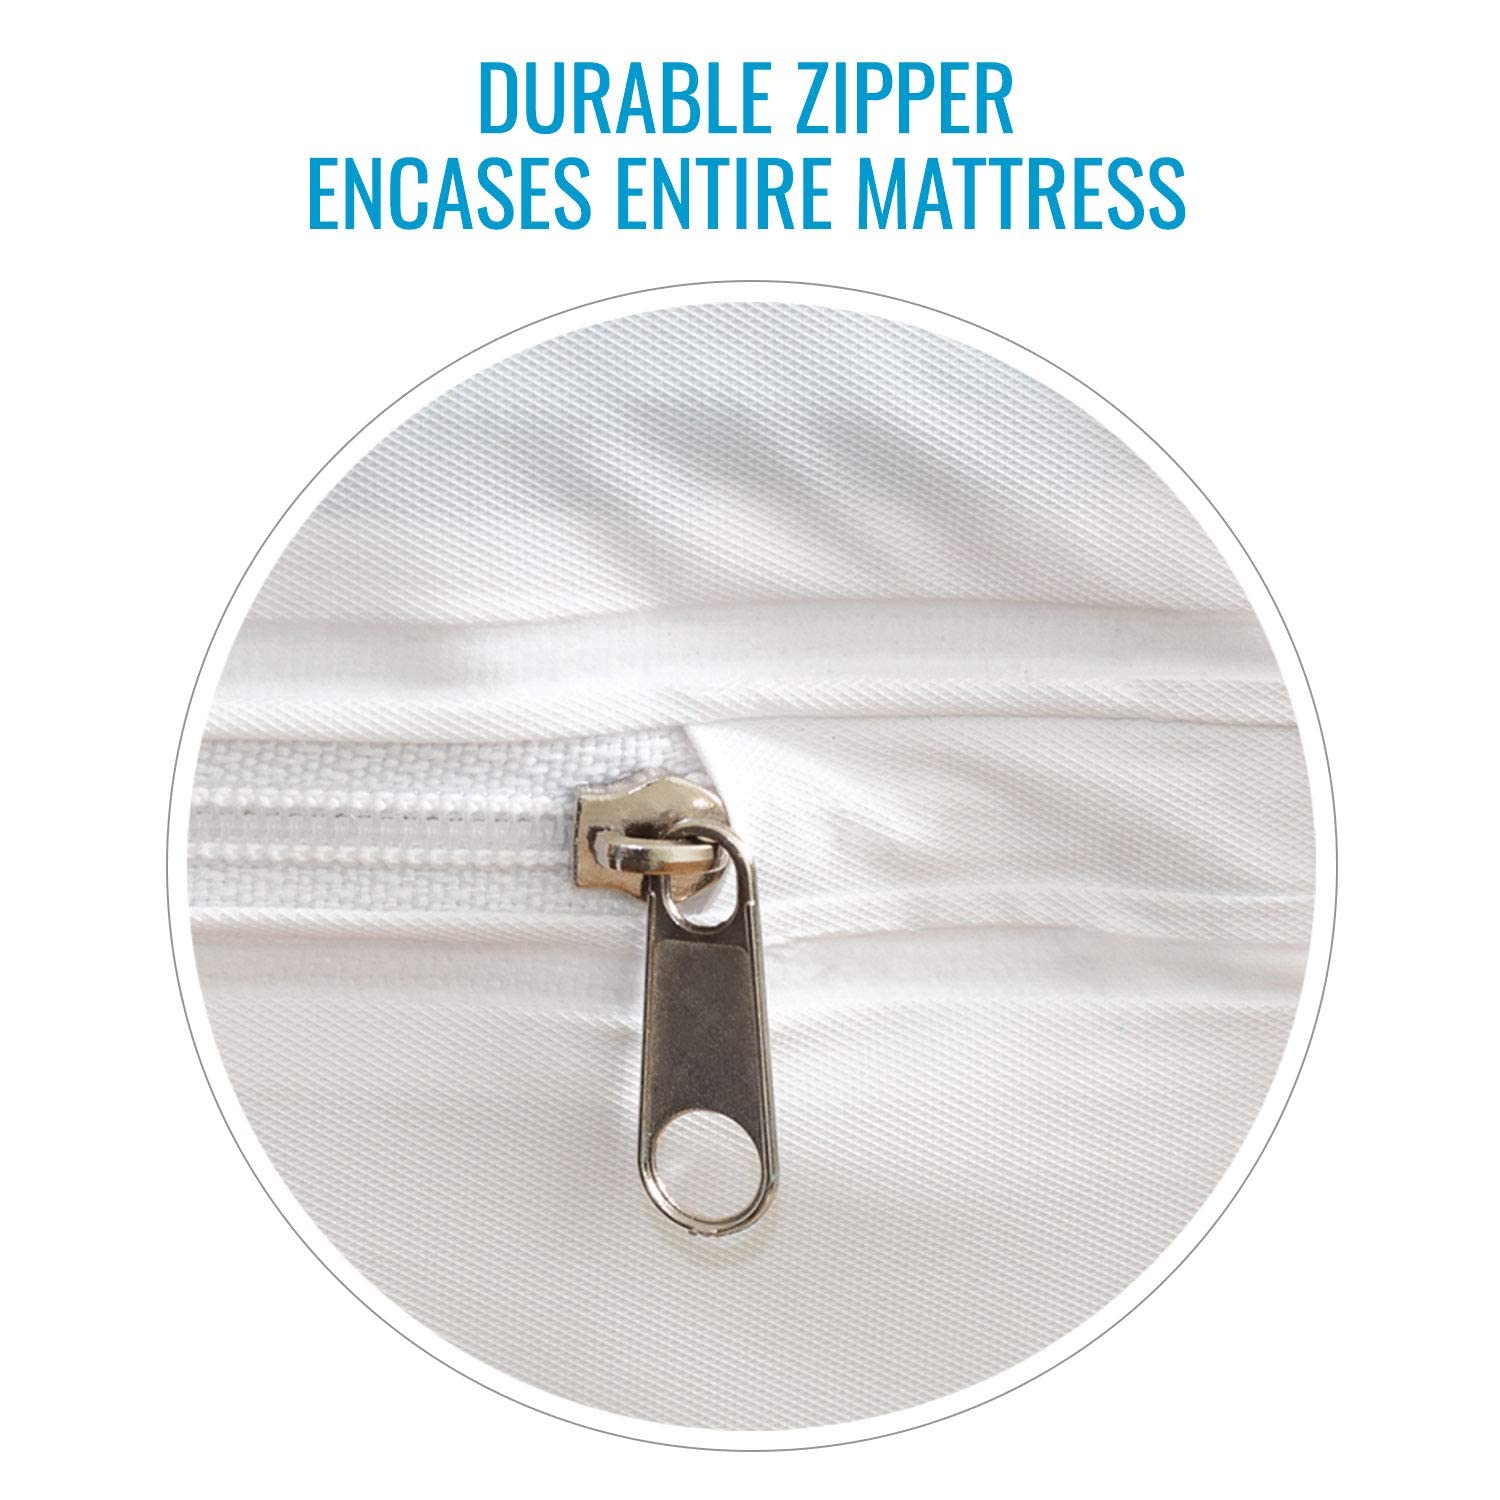 DMI Waterproof Mattress Protector and Mattress Cover, Encased Zippered Fit, Twin, Packaging may vary